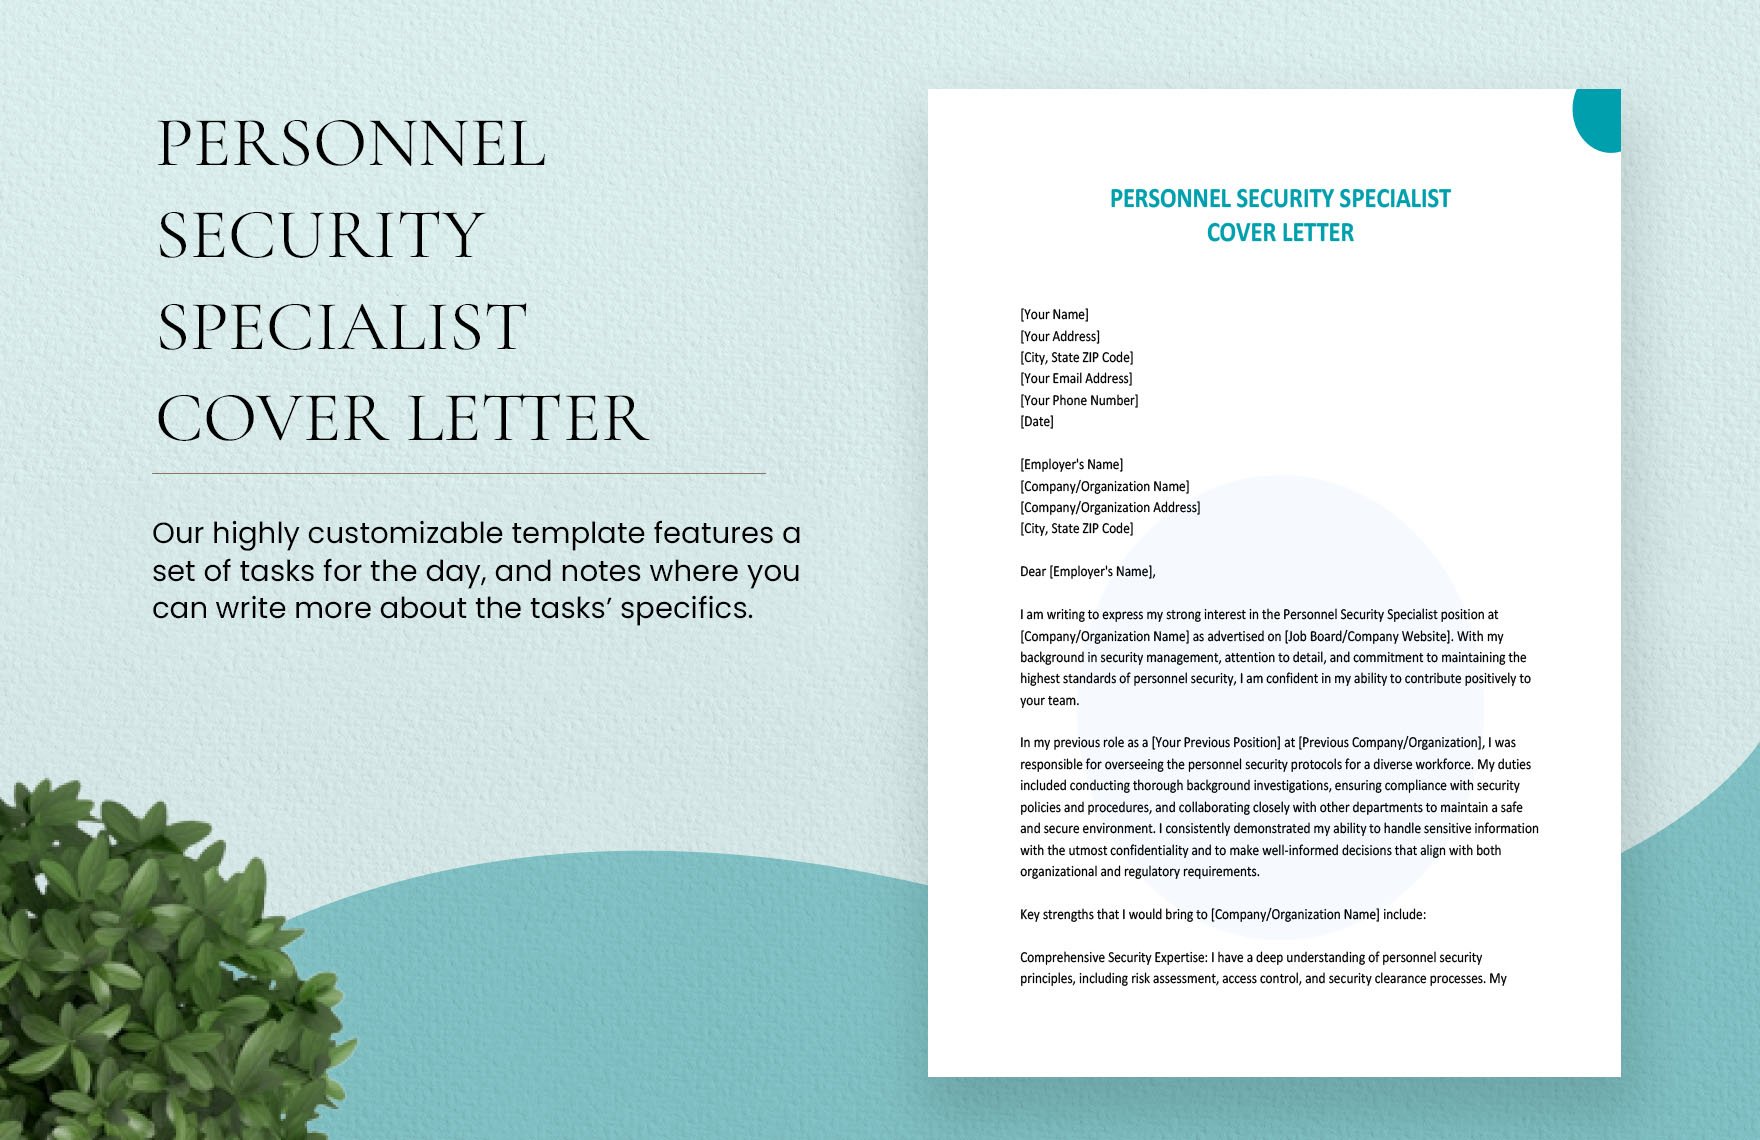 Personnel Security Specialist Cover Letter in Word, Google Docs